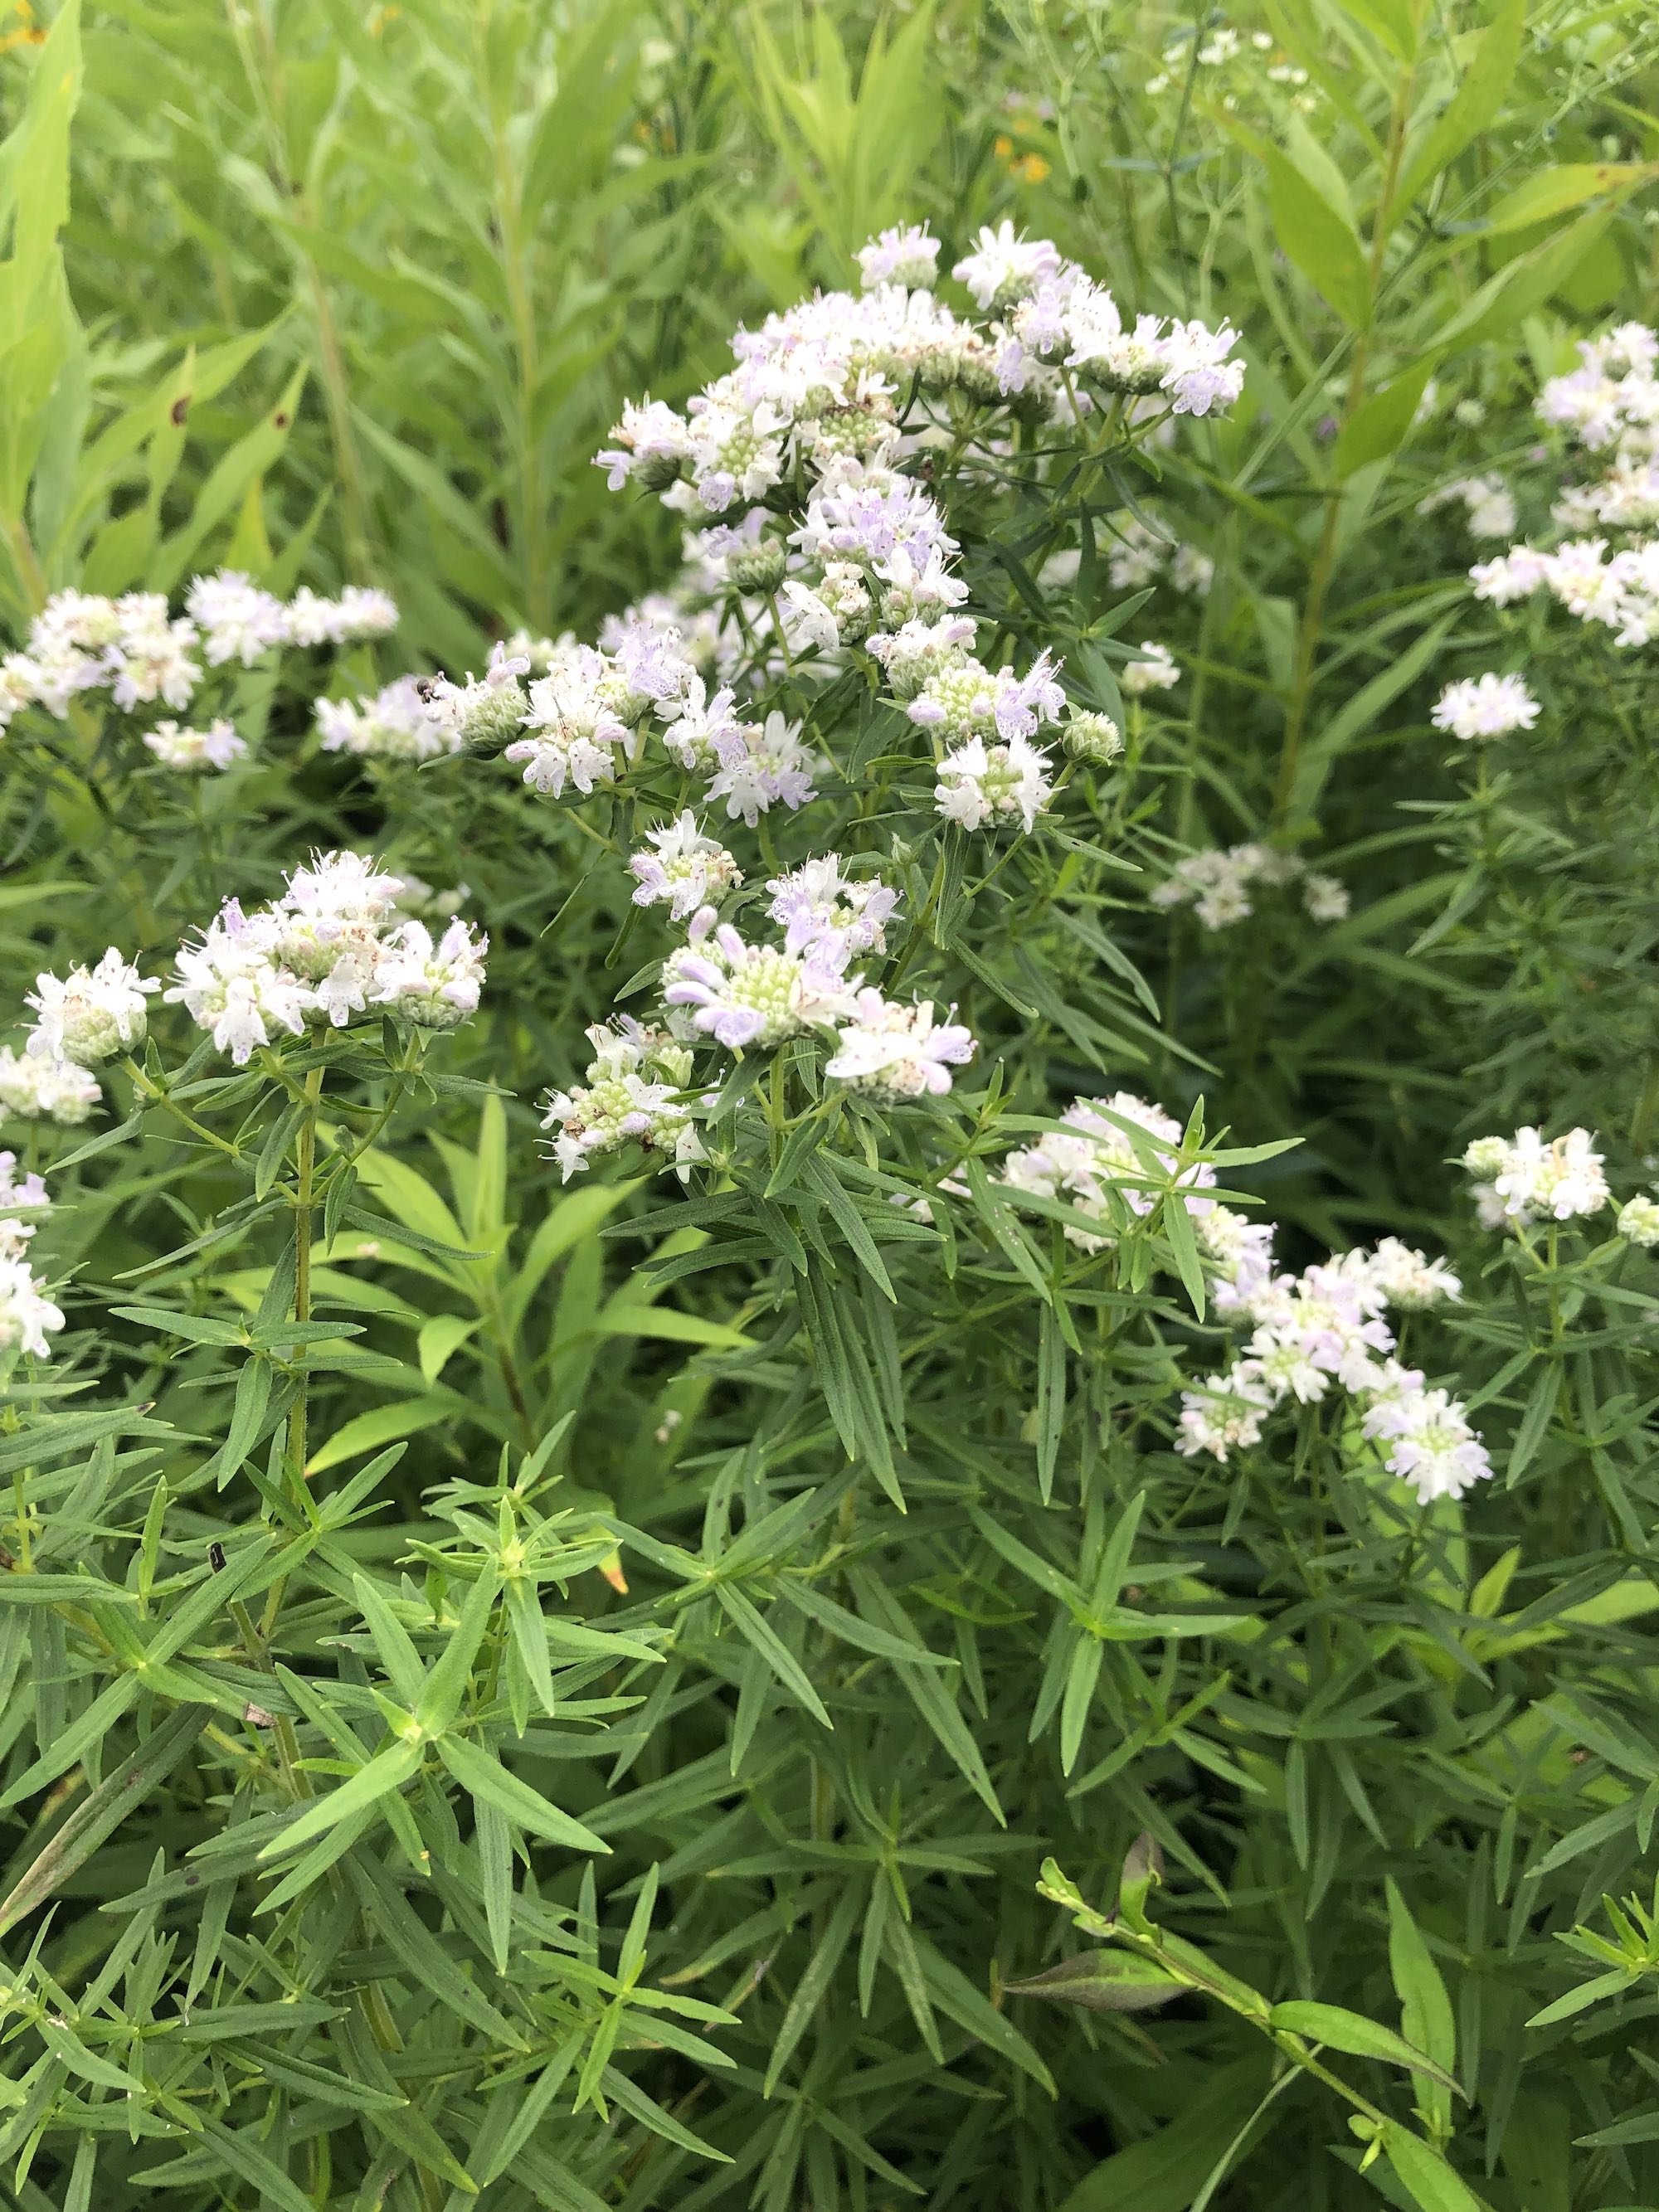 Common Mountain Mint overlooking Dawley Conservancy in Madison, Wisconsin on July 21, 2021.